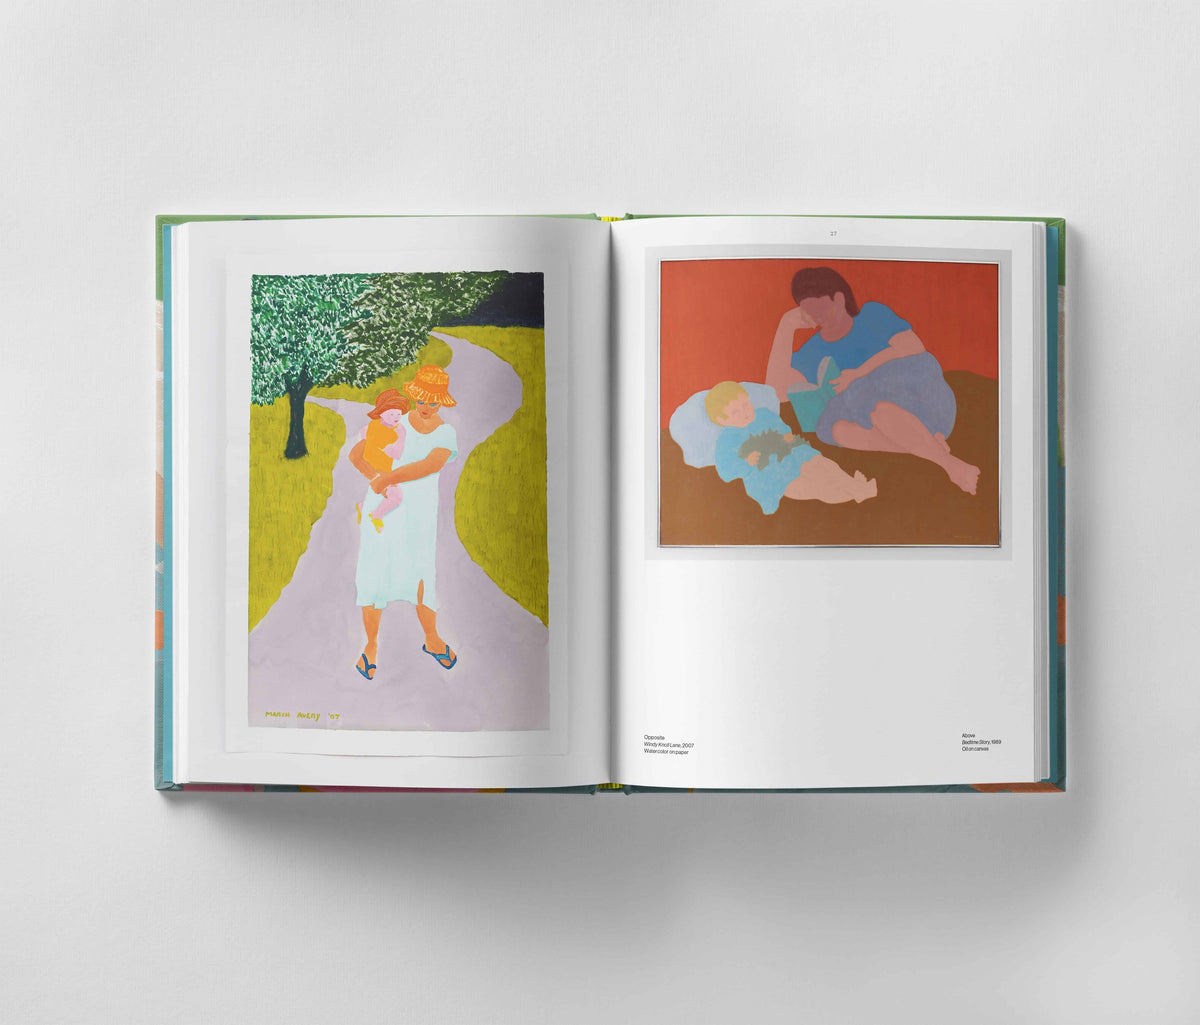 Open book displaying two pages of artwork; the left page features a colorful image of two people embracing near a path, while the right page shows an emotional depth with a sleeping adult and child on a red background, reminiscent of Black Dog Online's *March Avery: A Life in Color*.